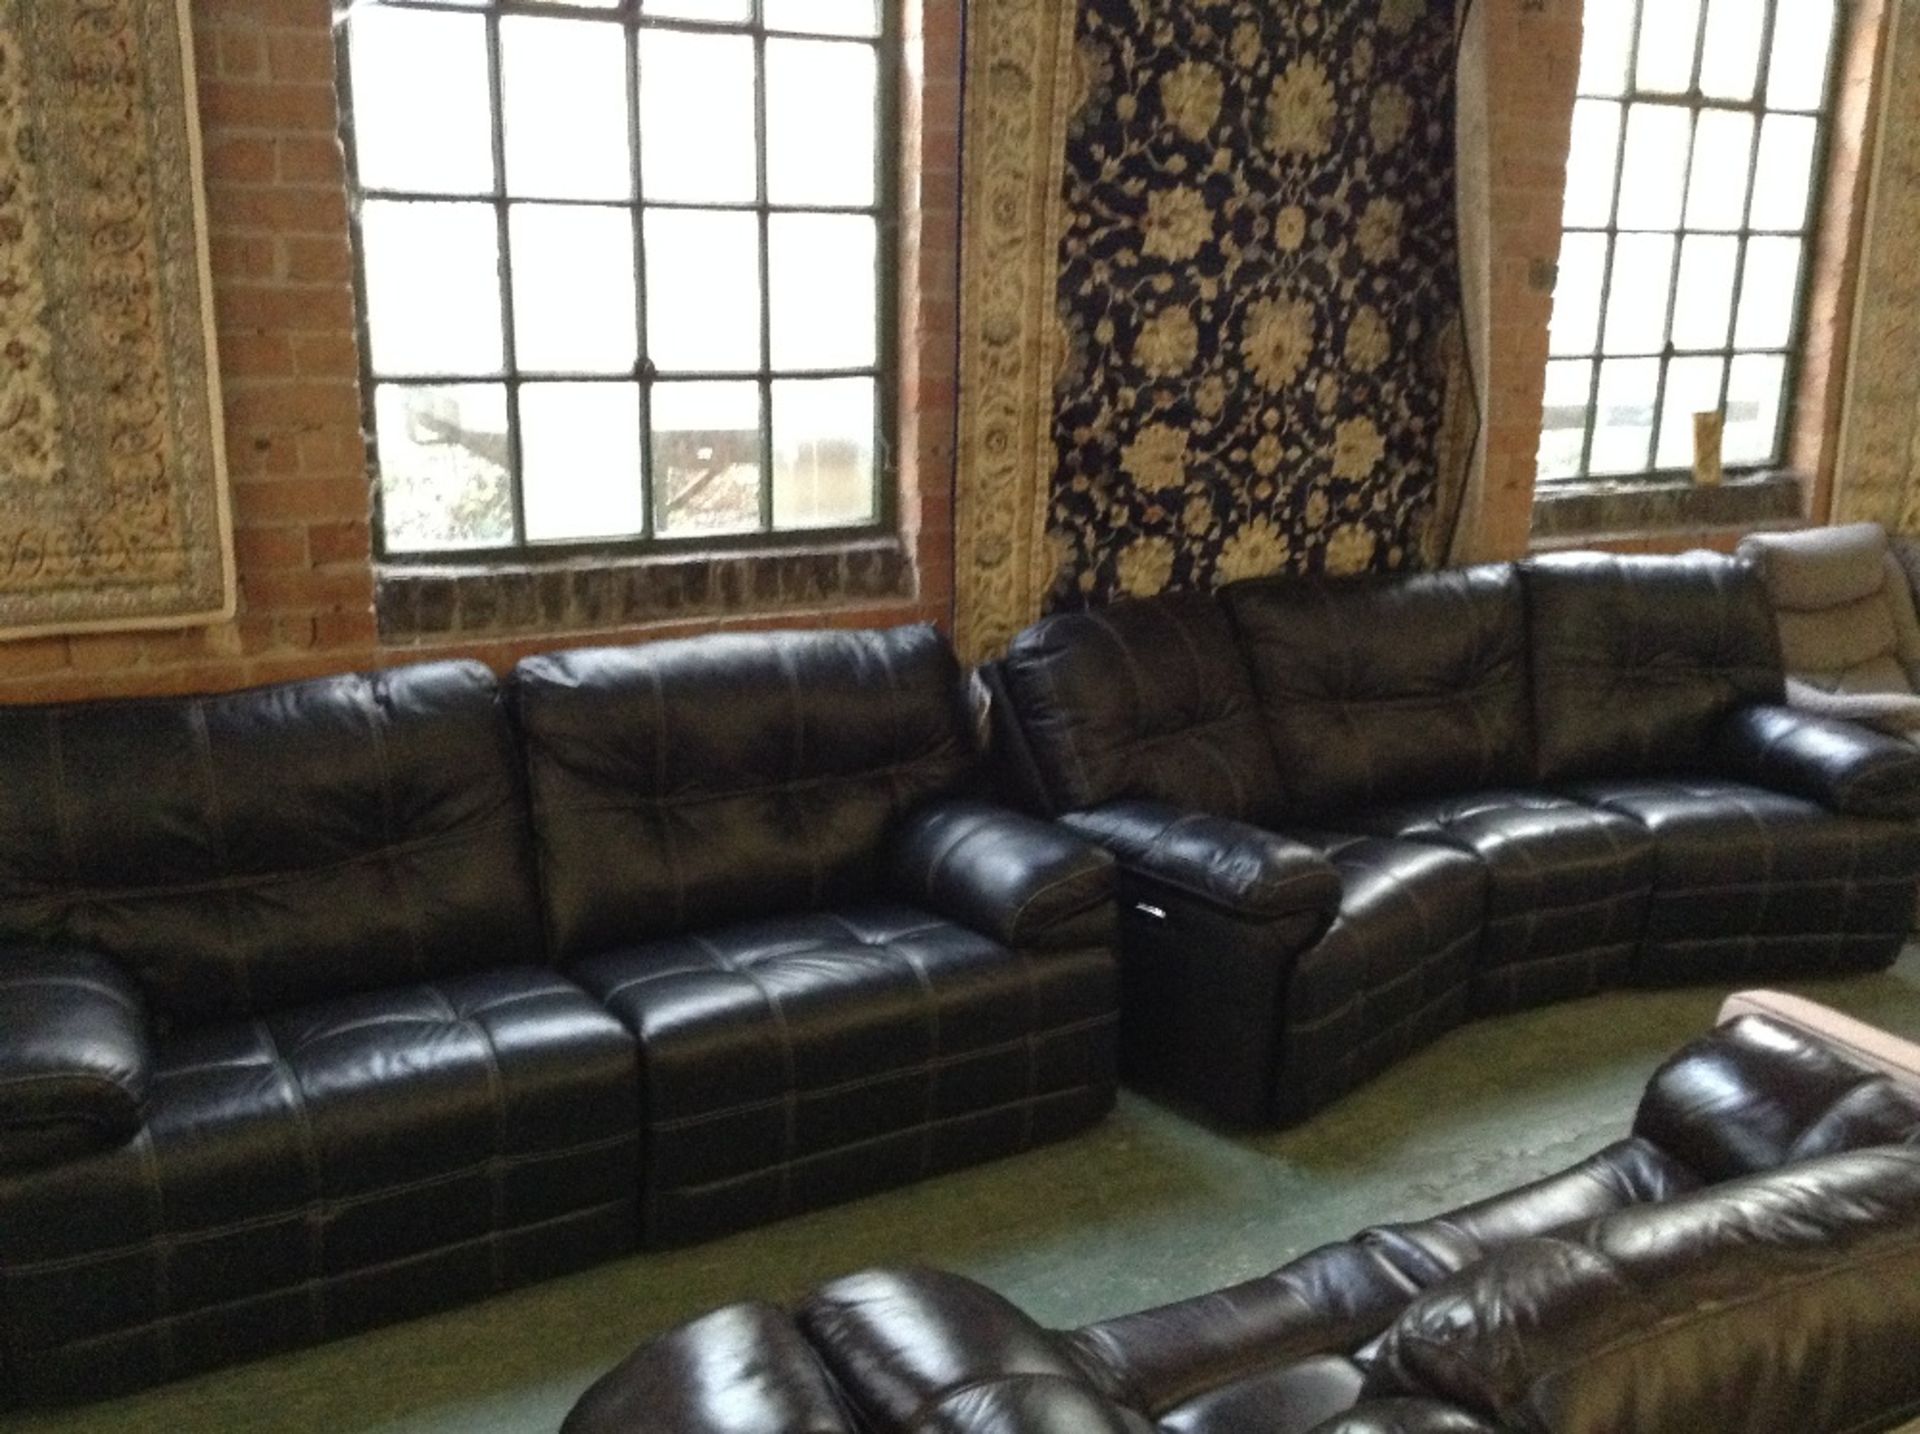 BLACK LEATHER WITH WHITE STITCH ELECTRIC RECLINING